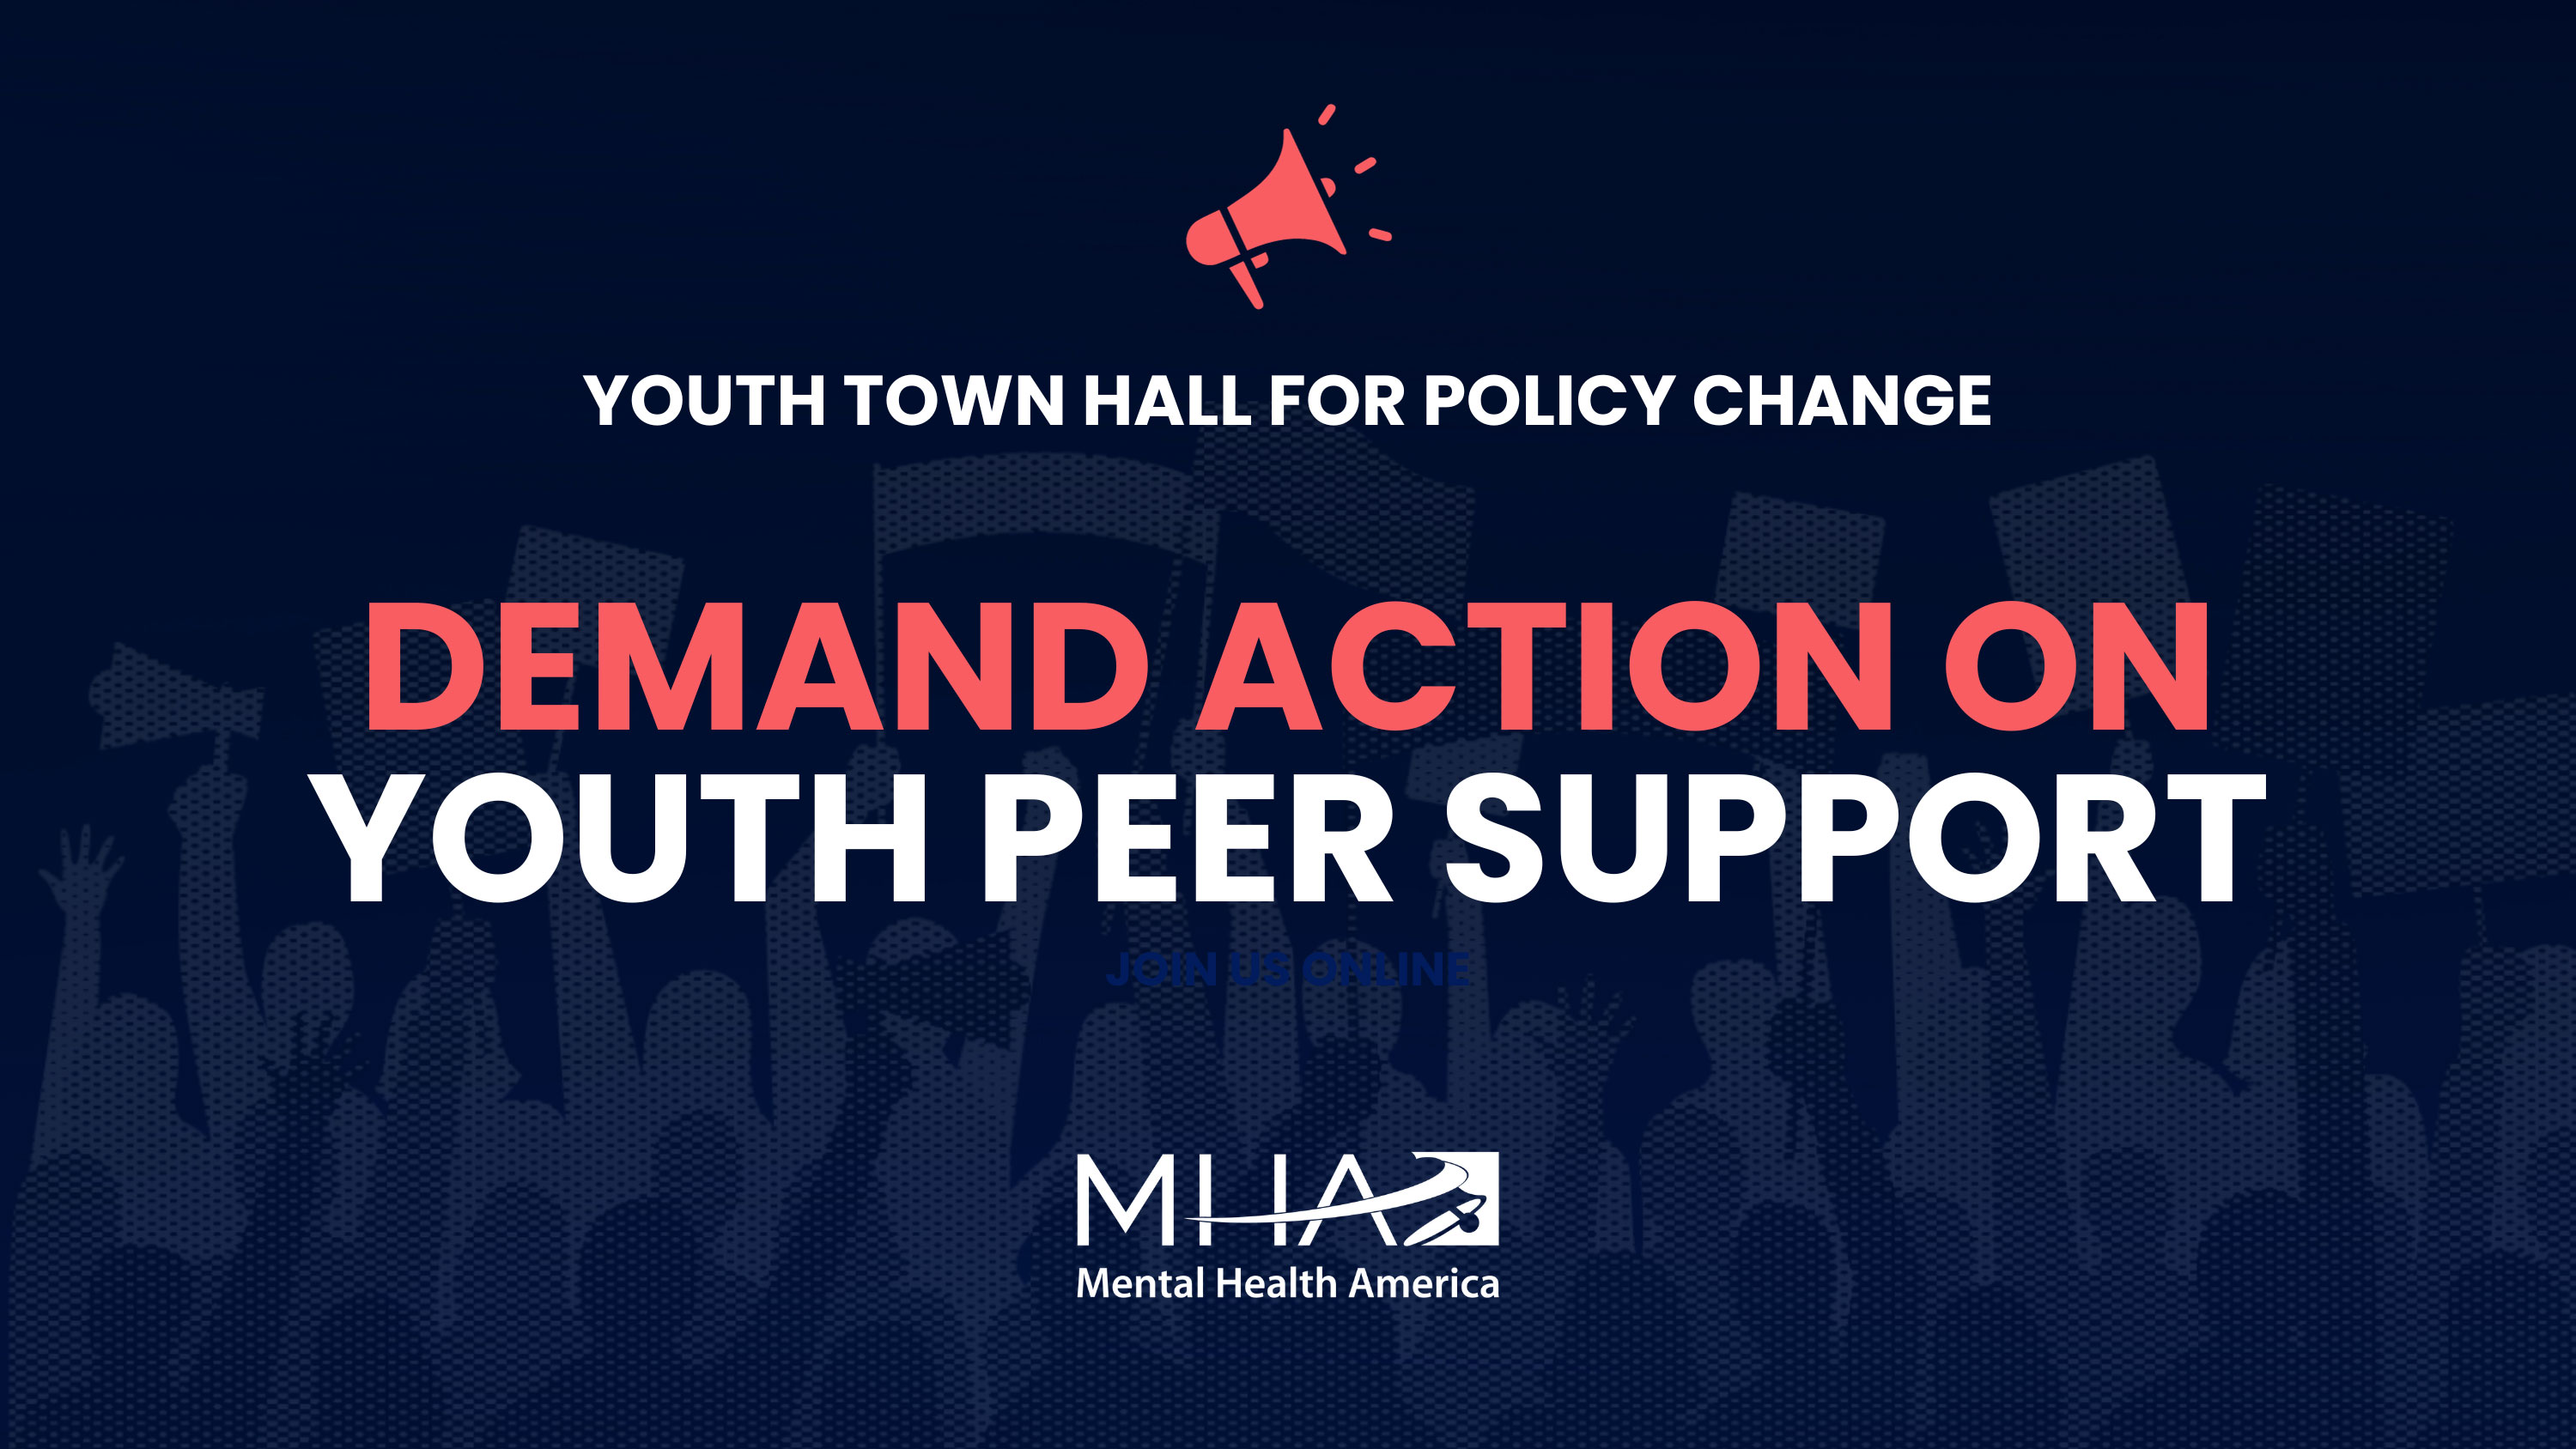 Youth Town Hall for Policy Change | Demand Action on Youth Peer Support